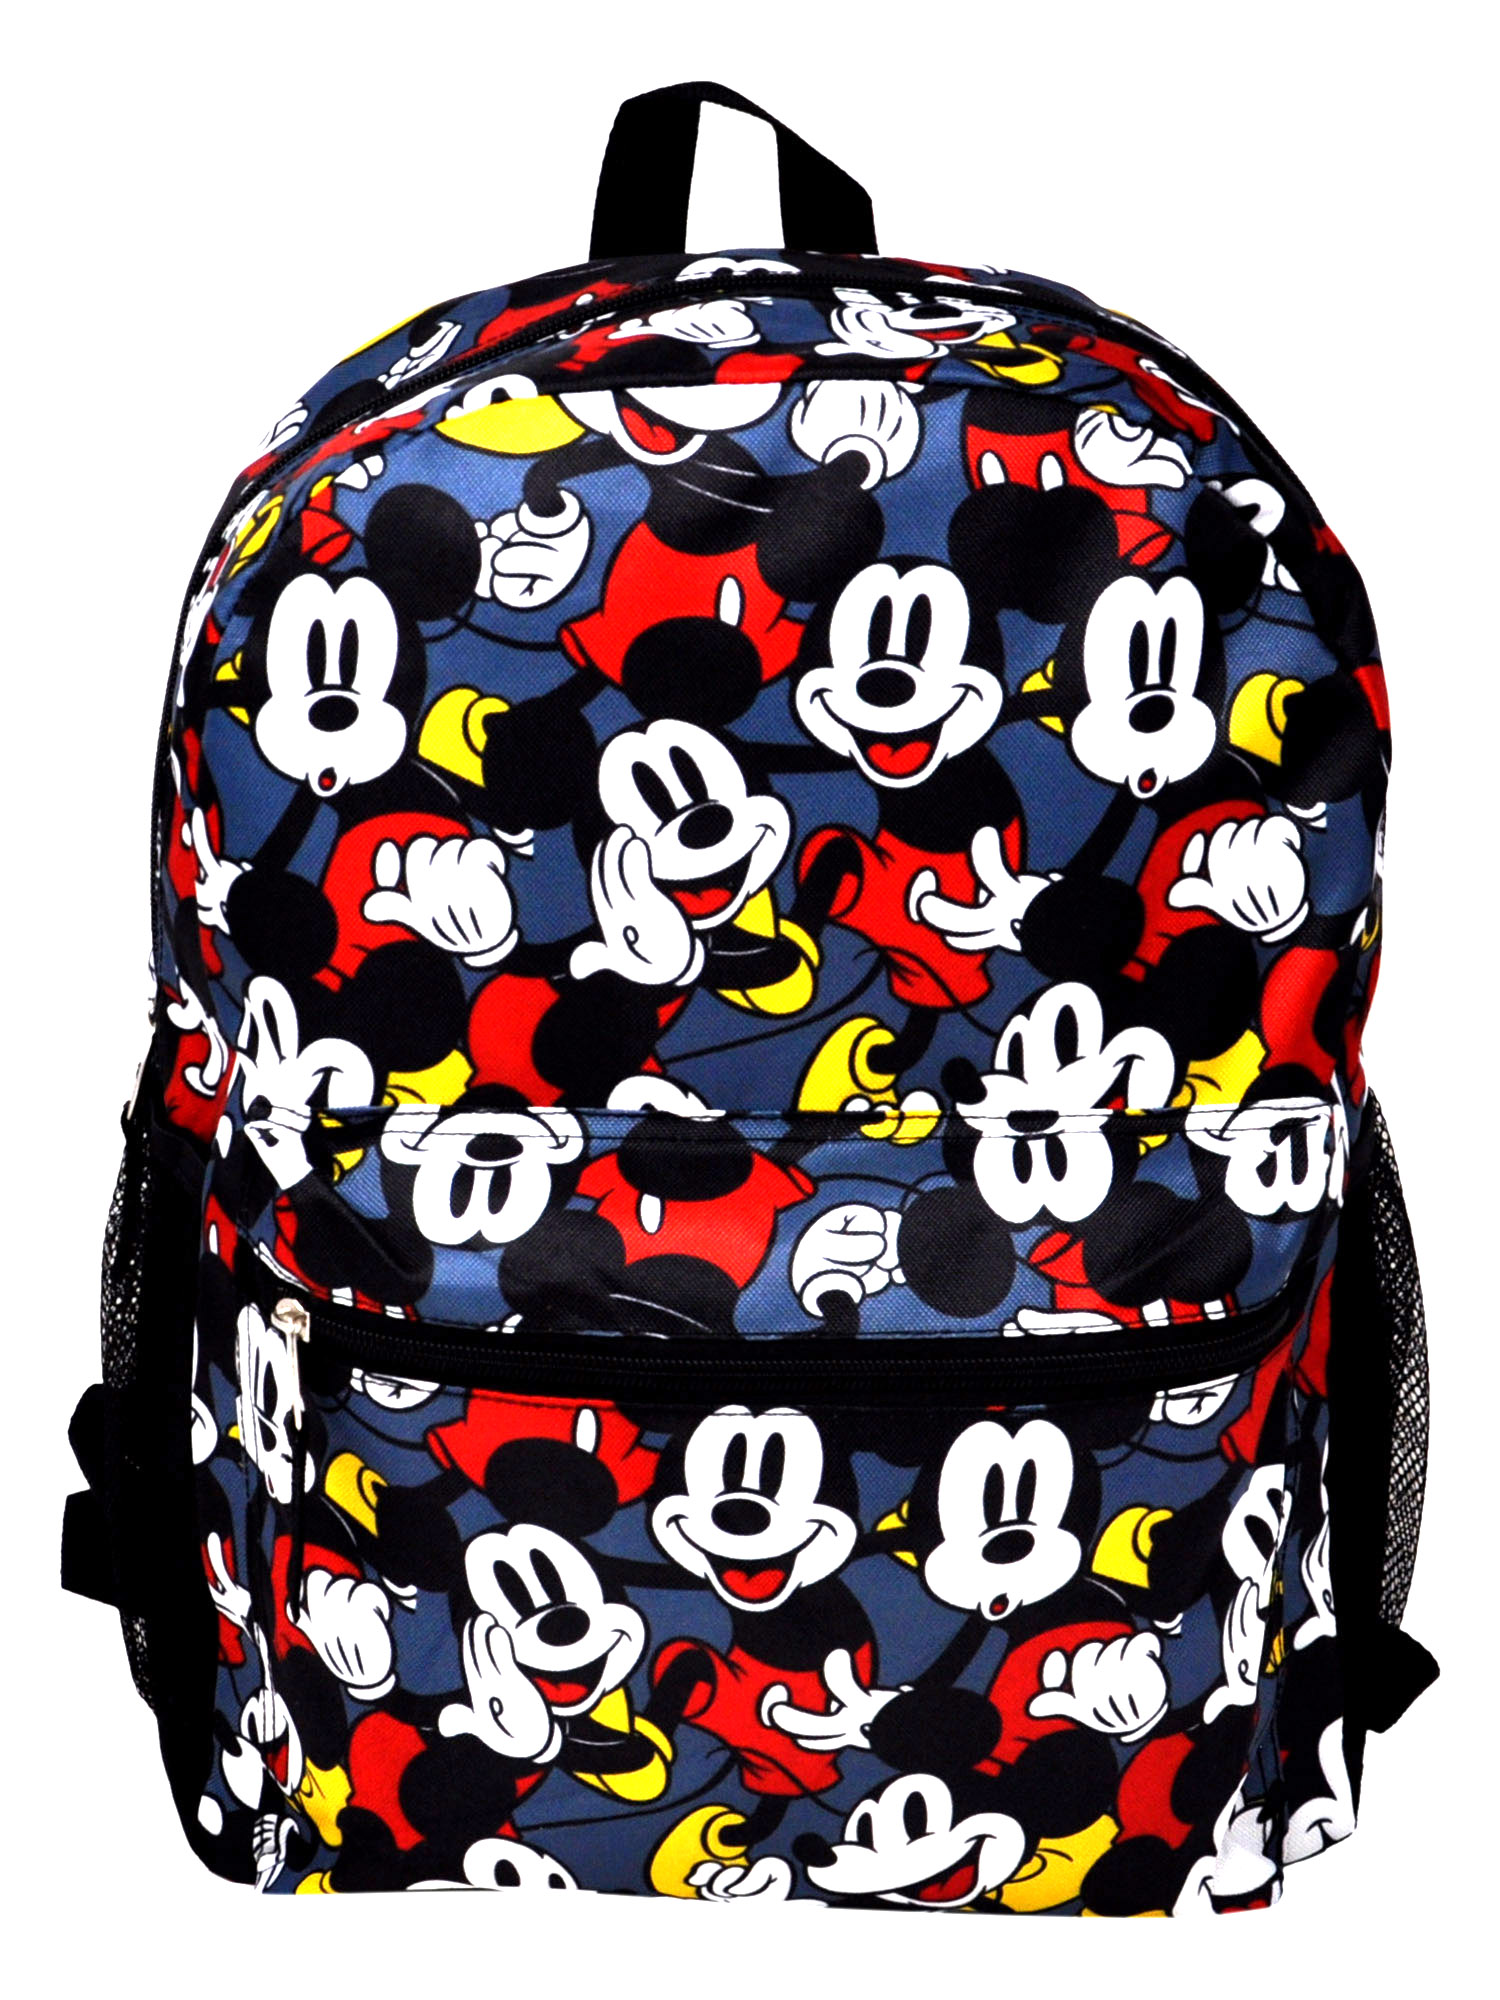 Disney Mickey Mouse Backpack 16" All-over Print Classic Front & Side Pockets - image 1 of 6